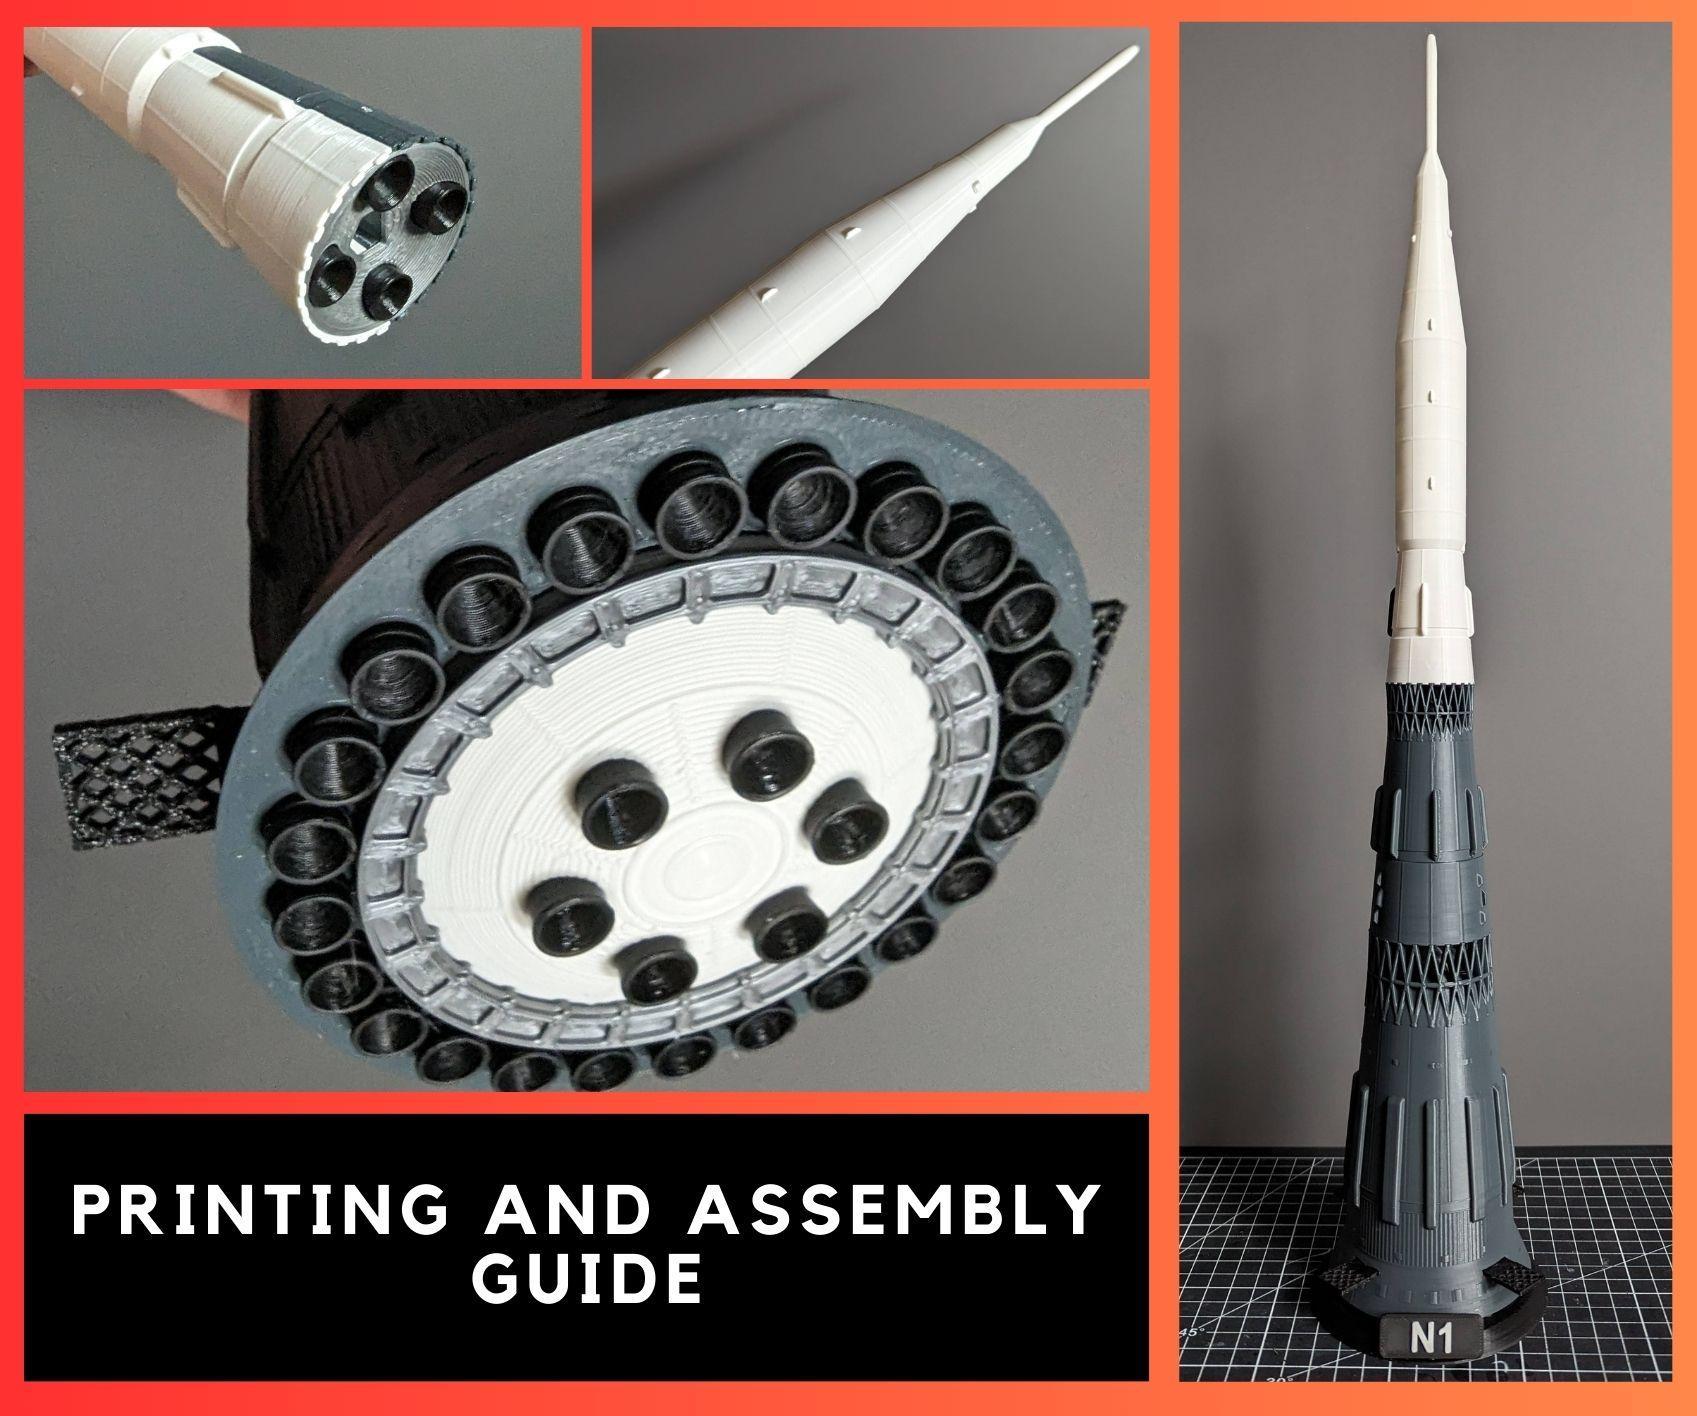 Printing and Assembly Guide of the Soviet N-1 Rocket